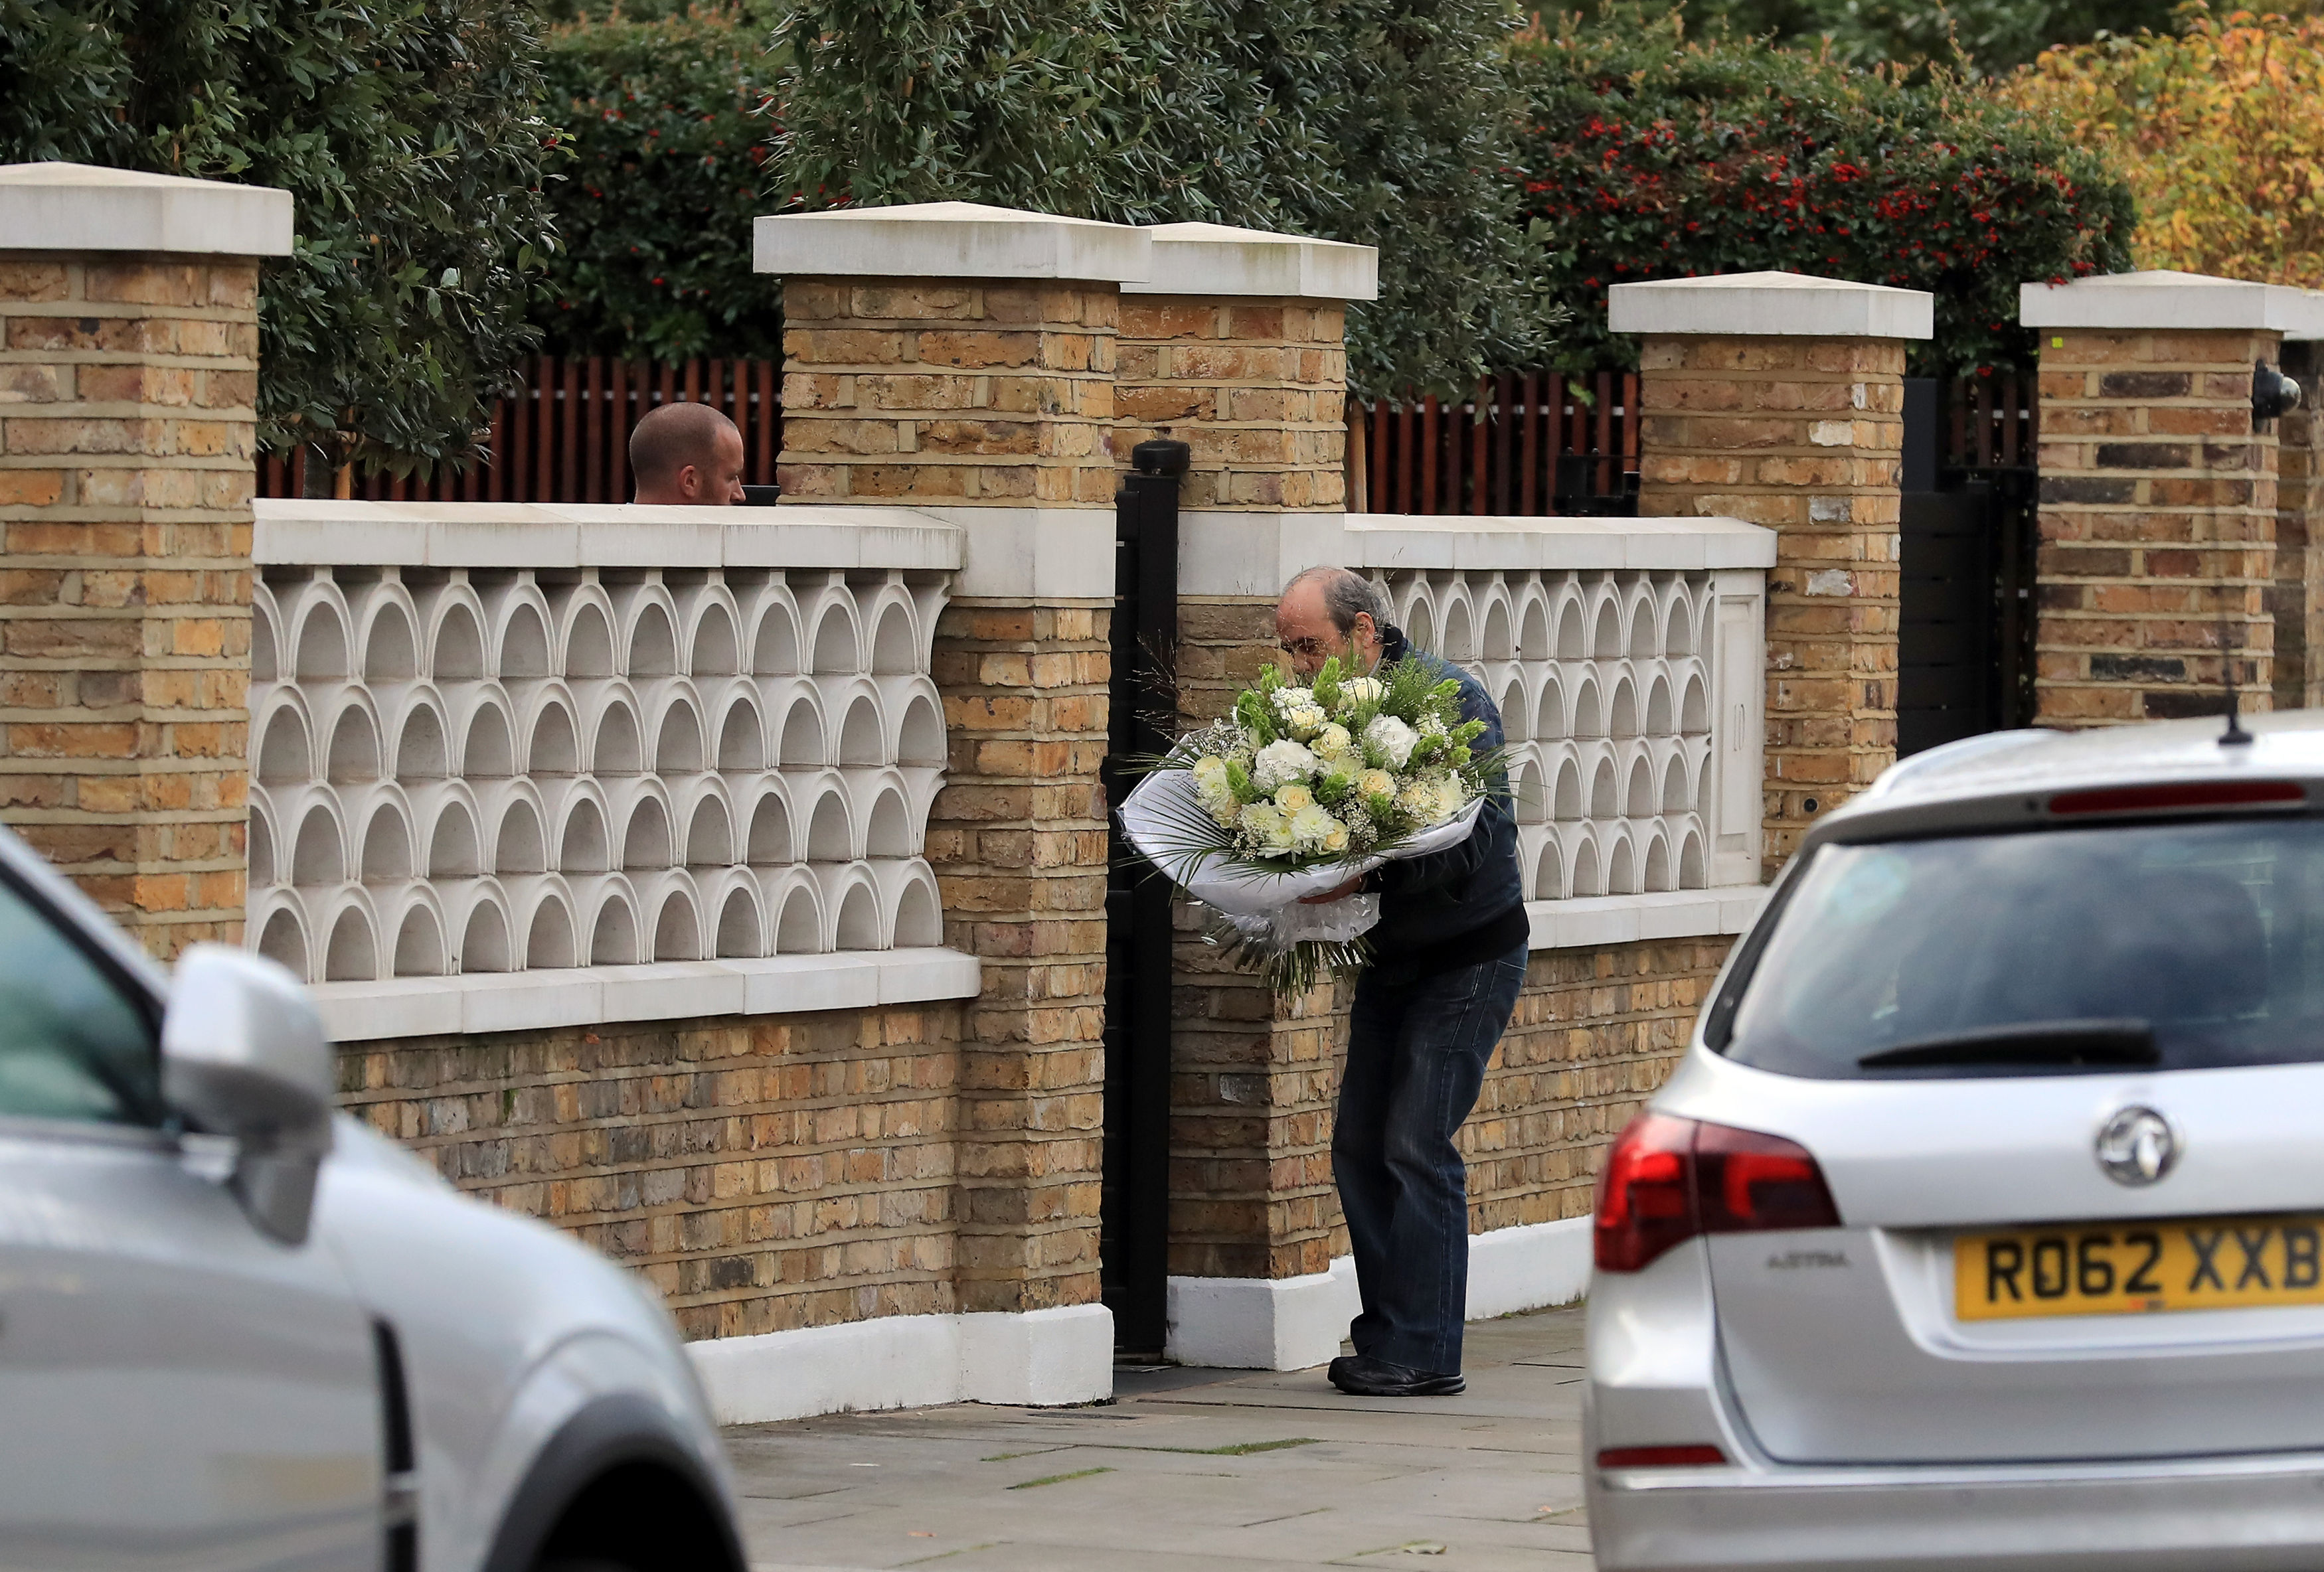 Flowers are delivered to the home of X Factor judge Simon Cowell in Holland Park in 2018 | Source: Getty Images